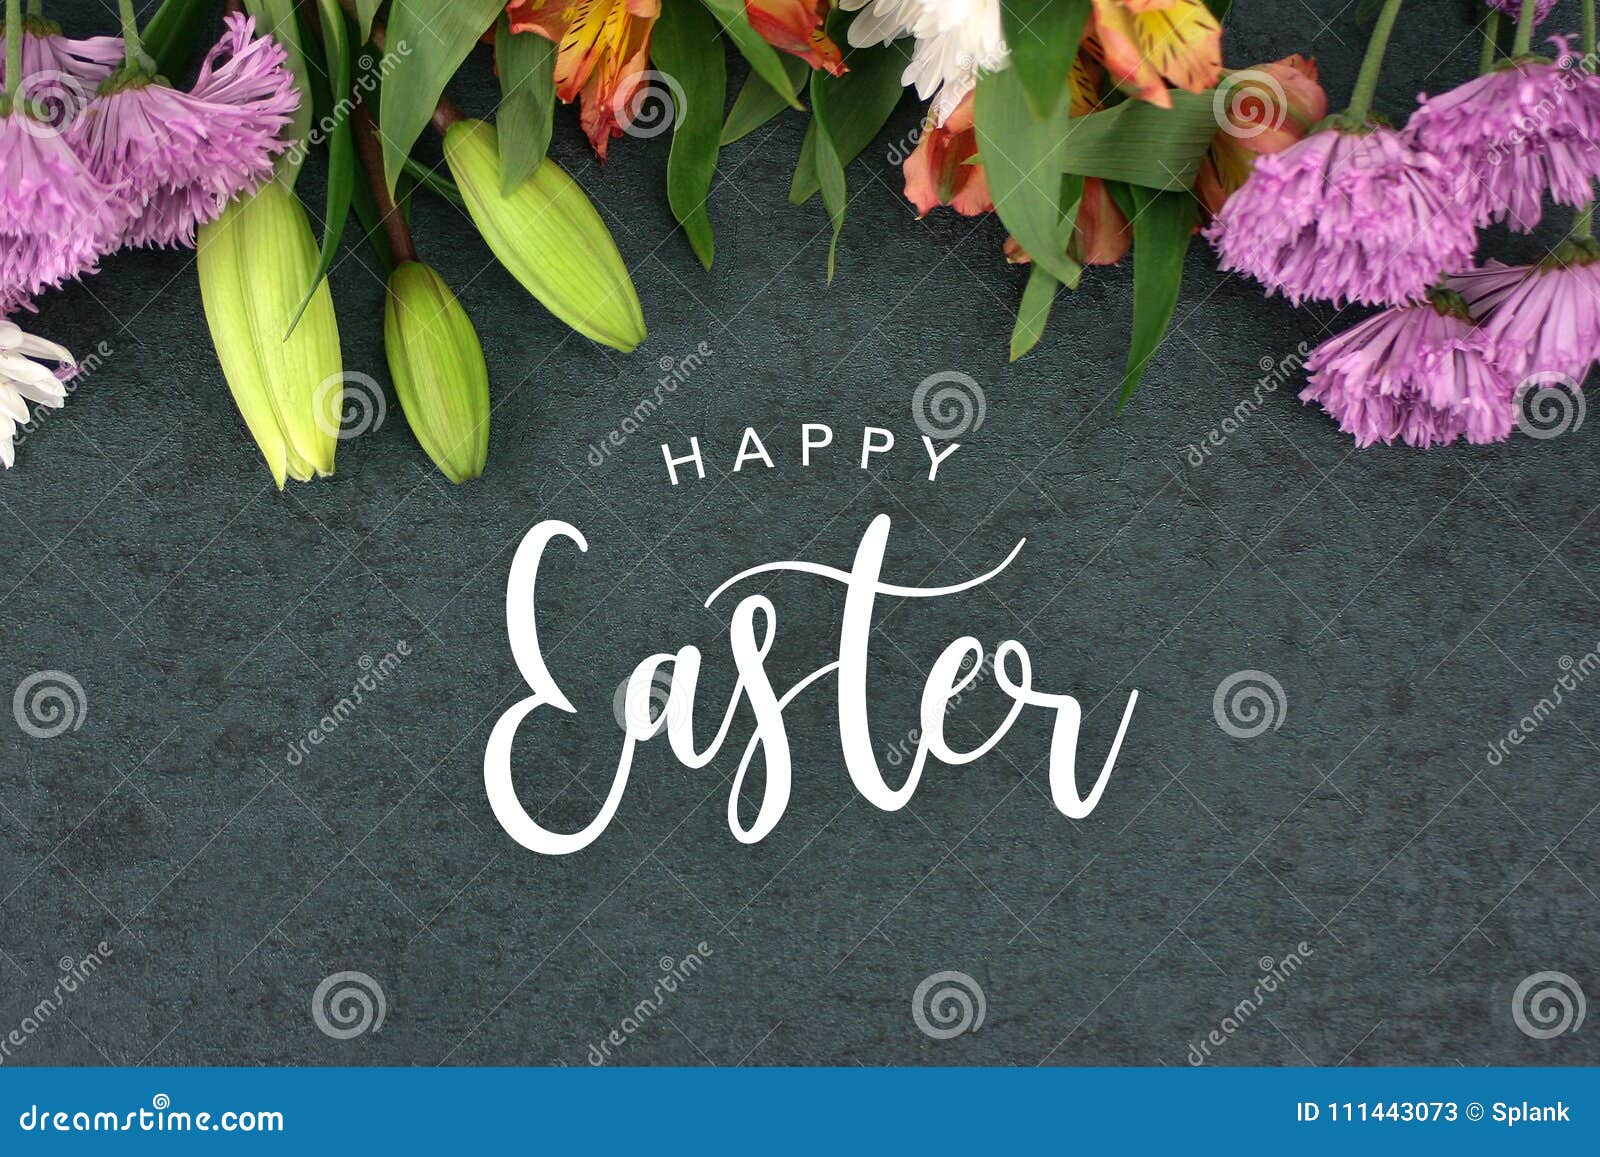 happy easter text with beautiful colorful flowers bouquet border